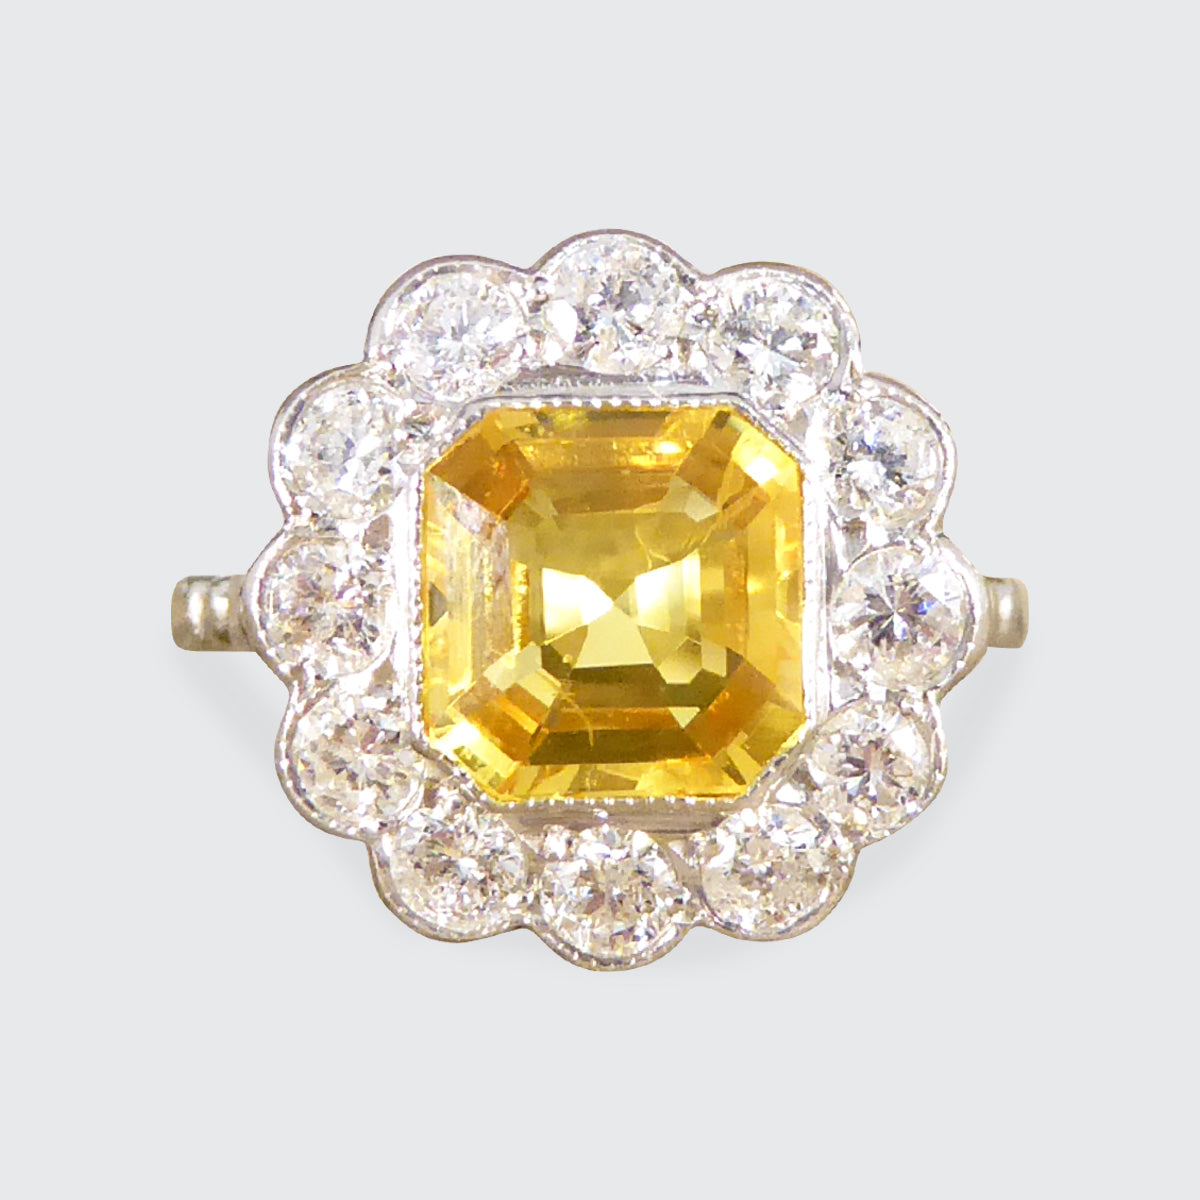 2.10ct Asscher Cut Yellow Sapphire and 0.90ct Diamond Cluster Ring in 18ct White Gold